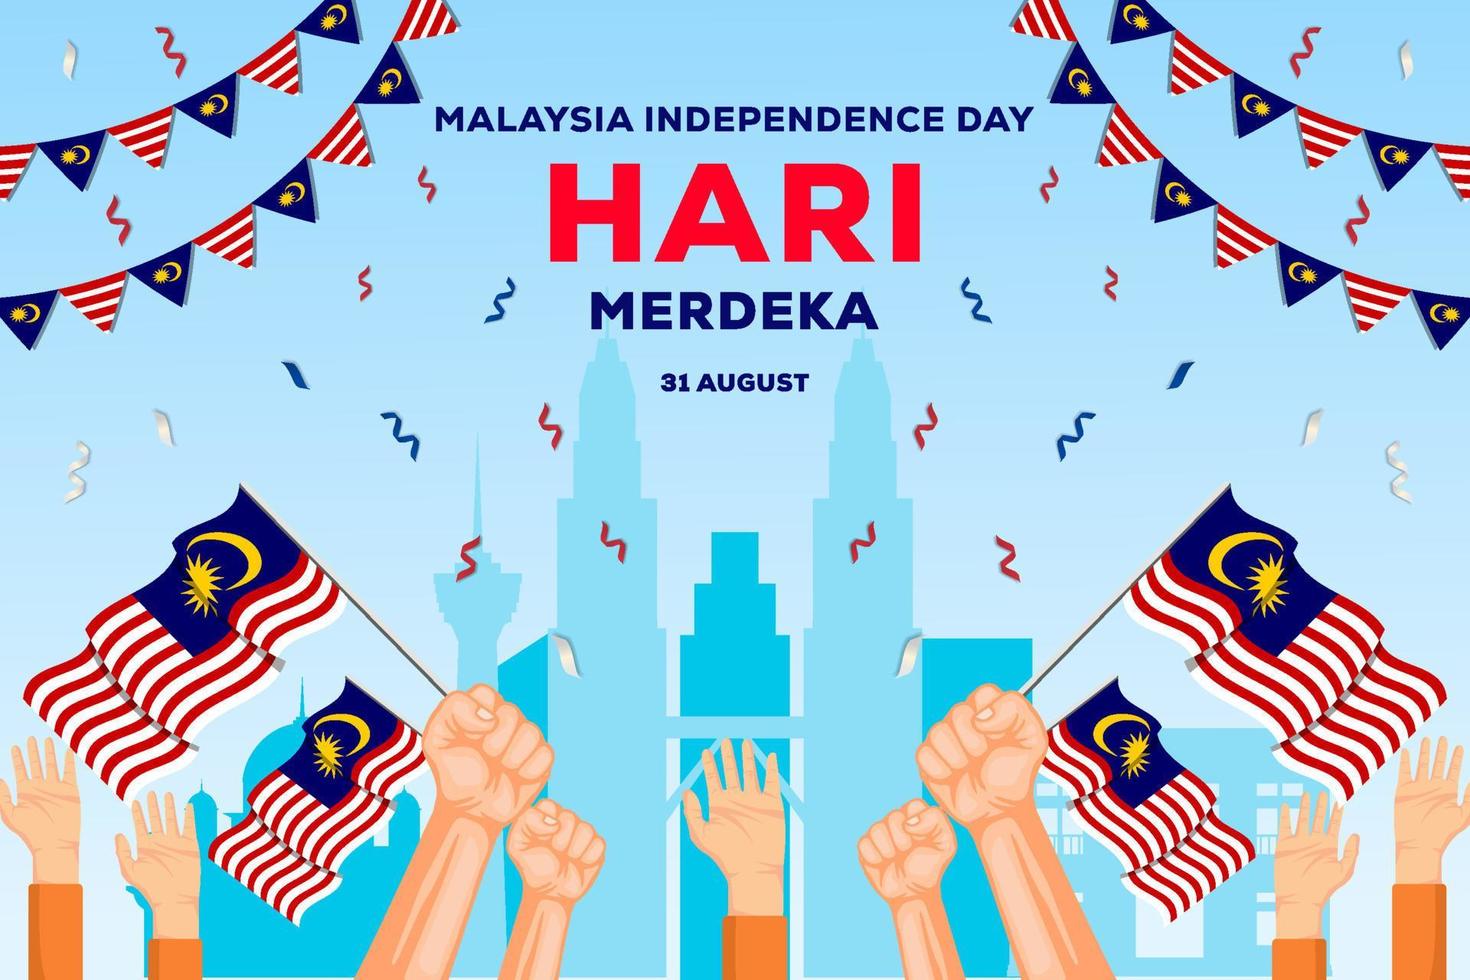 malaysia independence day 31 august background illustration with hands holding malaysian flags vector